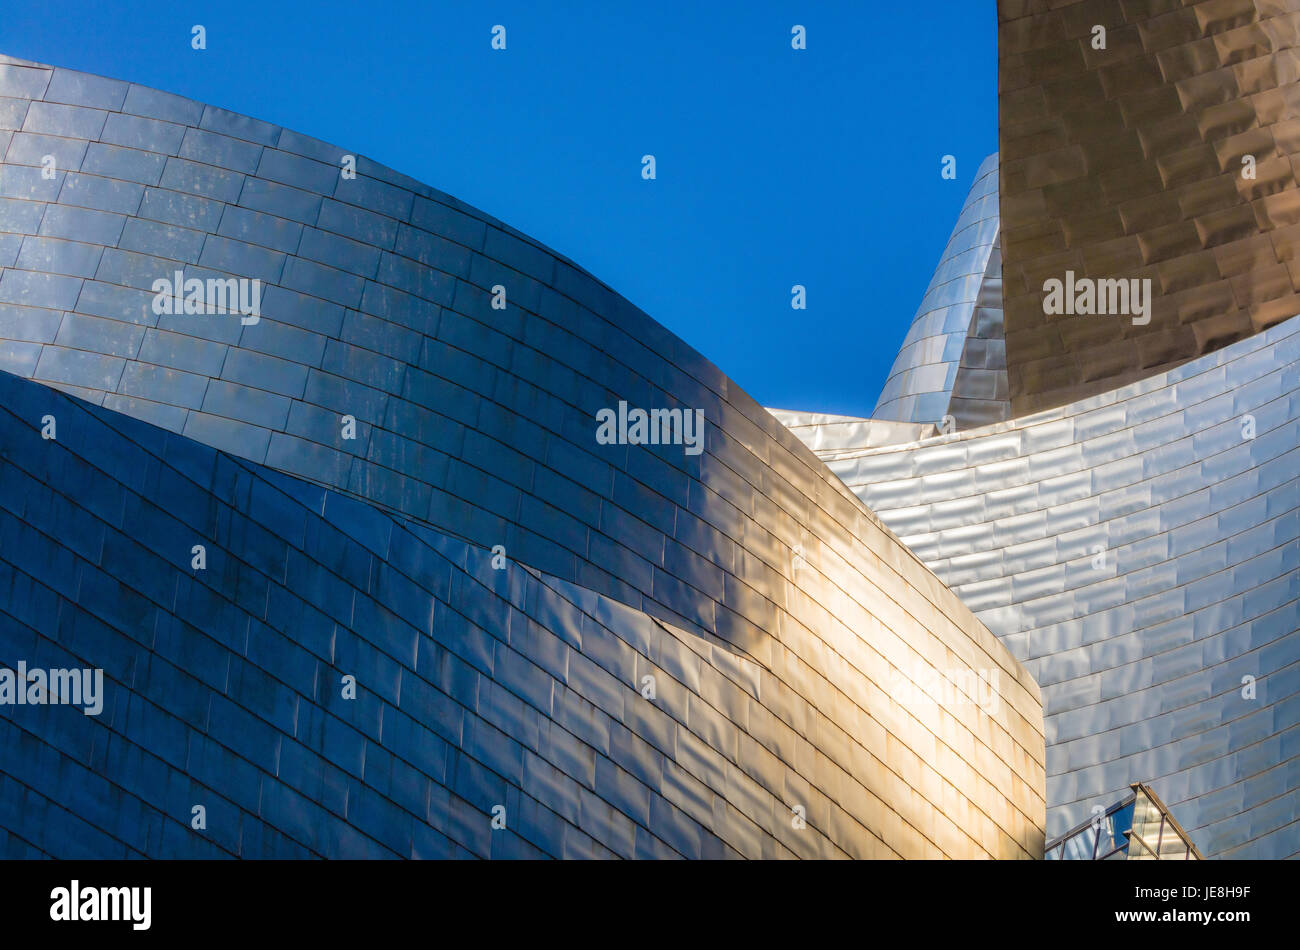 Sinuous titanium and limestone facade of the Guggenheim Museum at Bilbao in Spain's Basque country Stock Photo